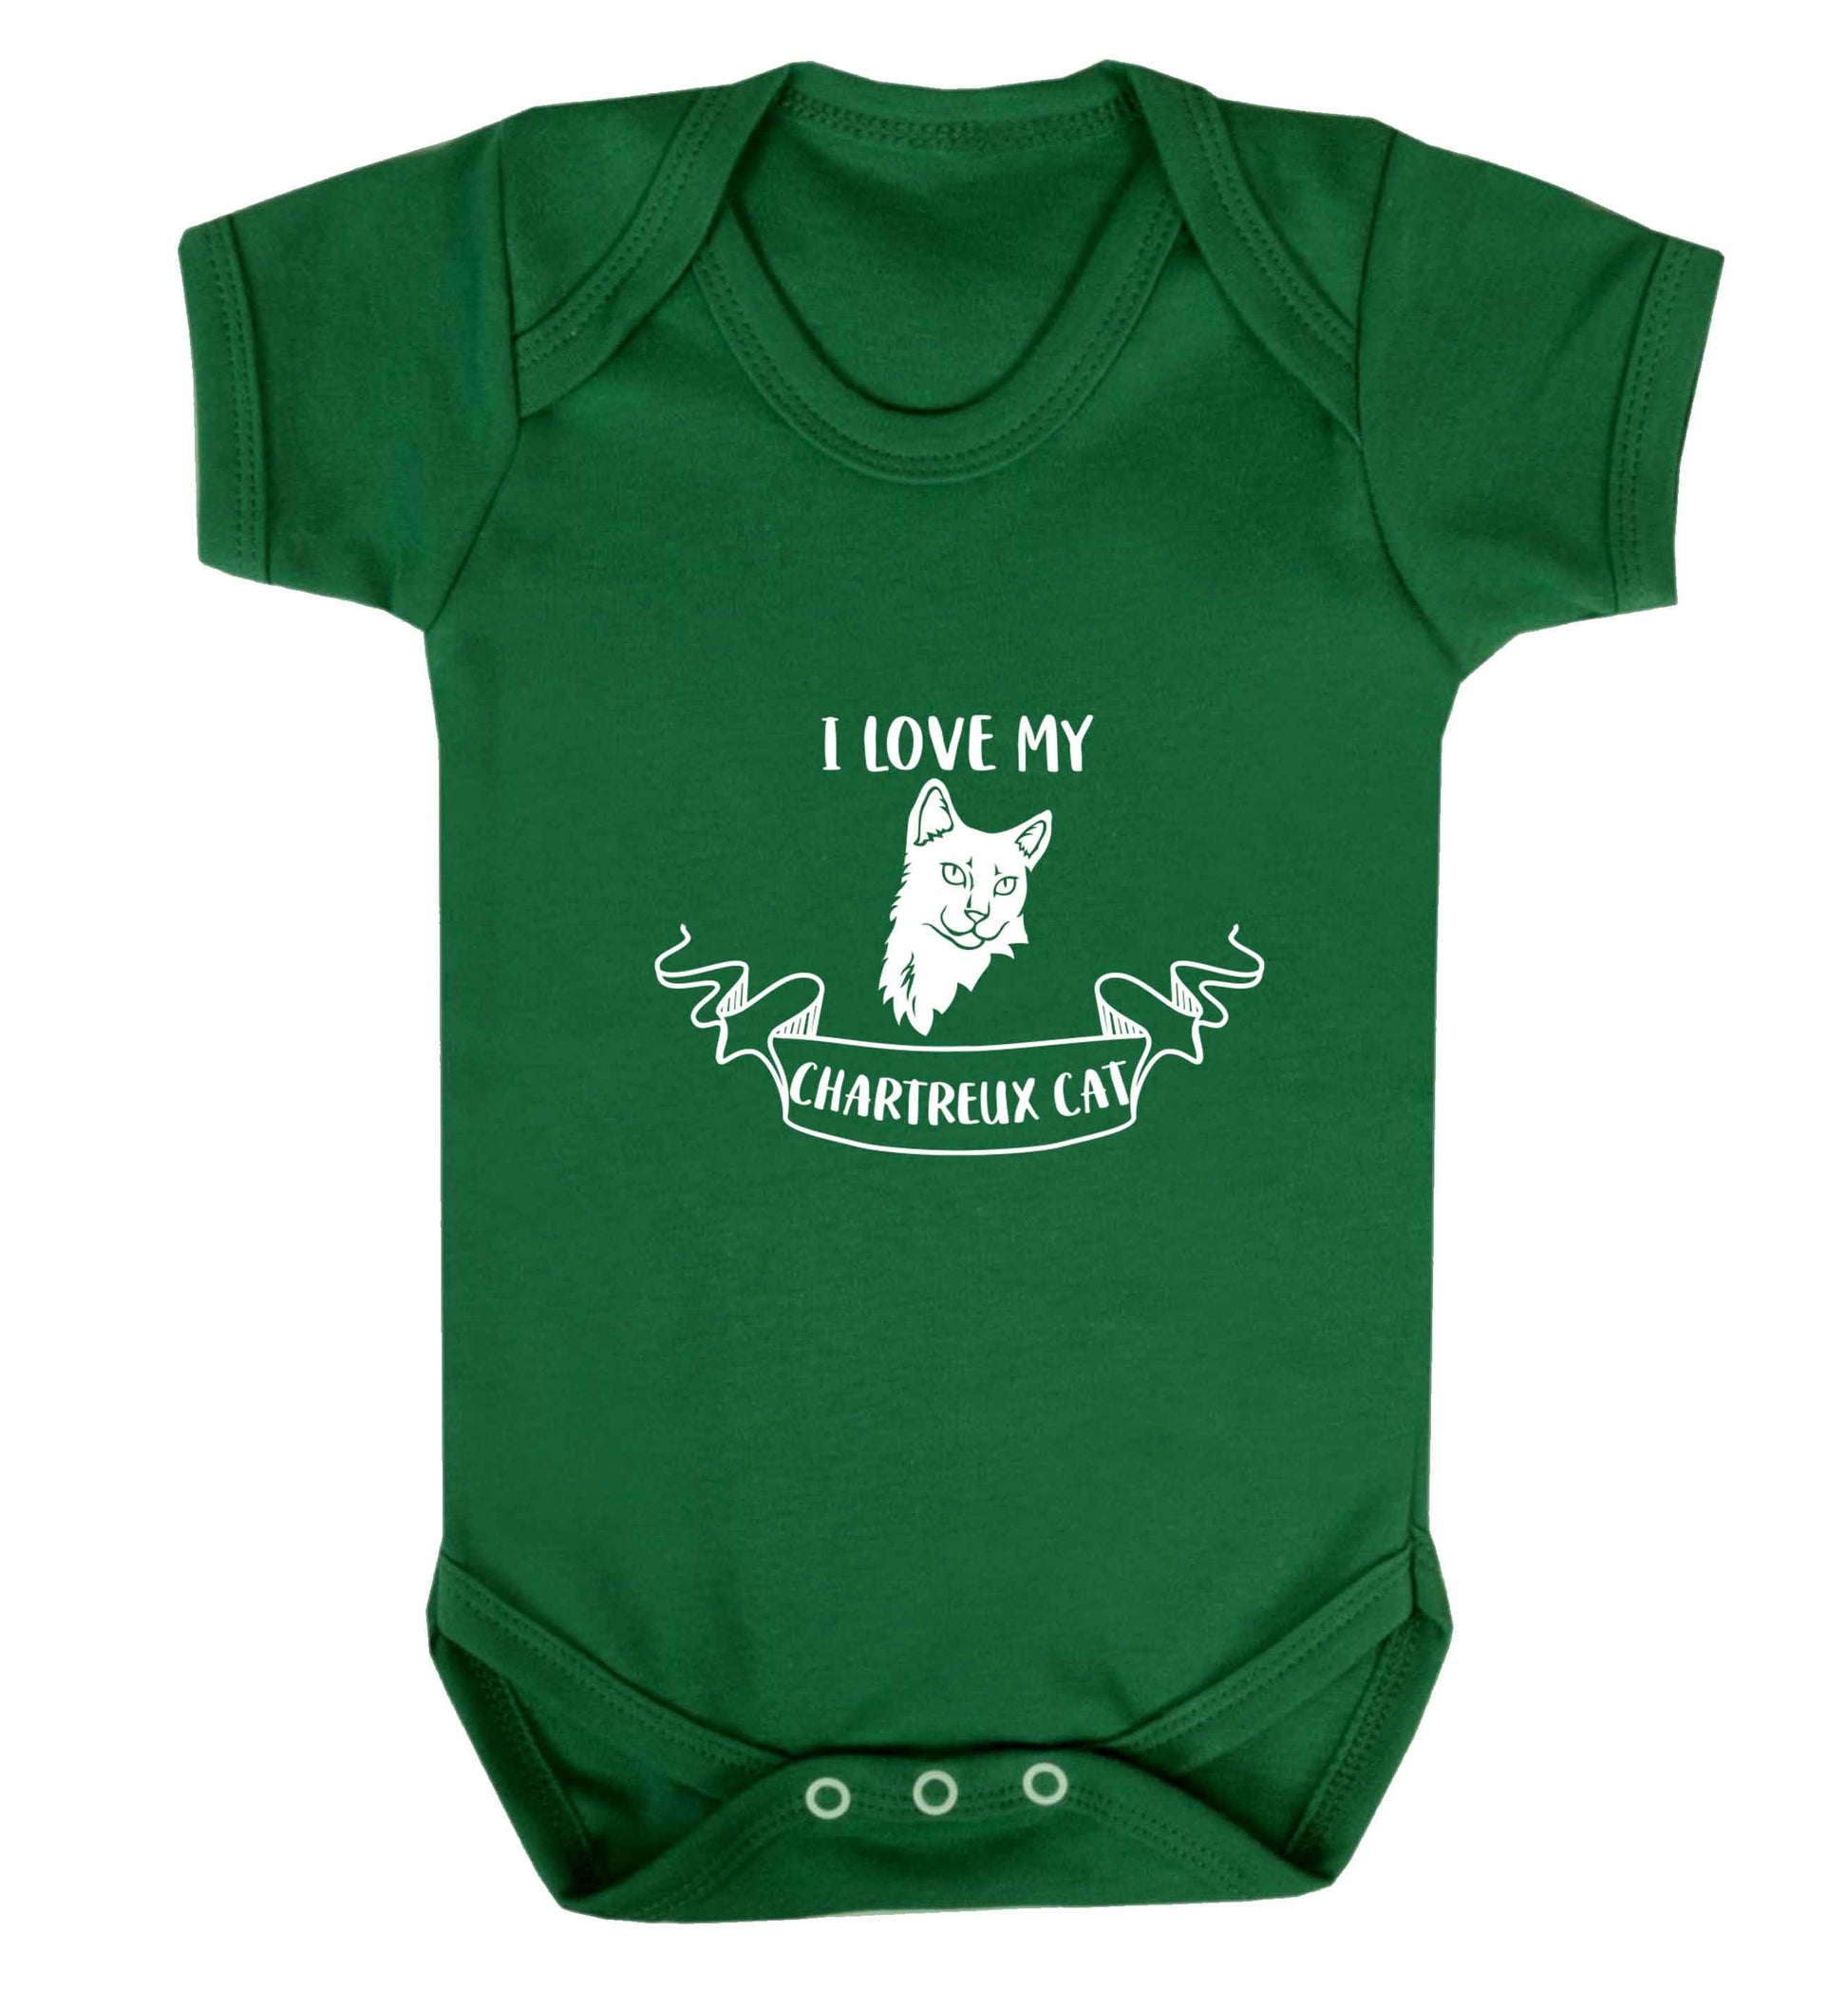 I love my chartreux cat baby vest green 18-24 months